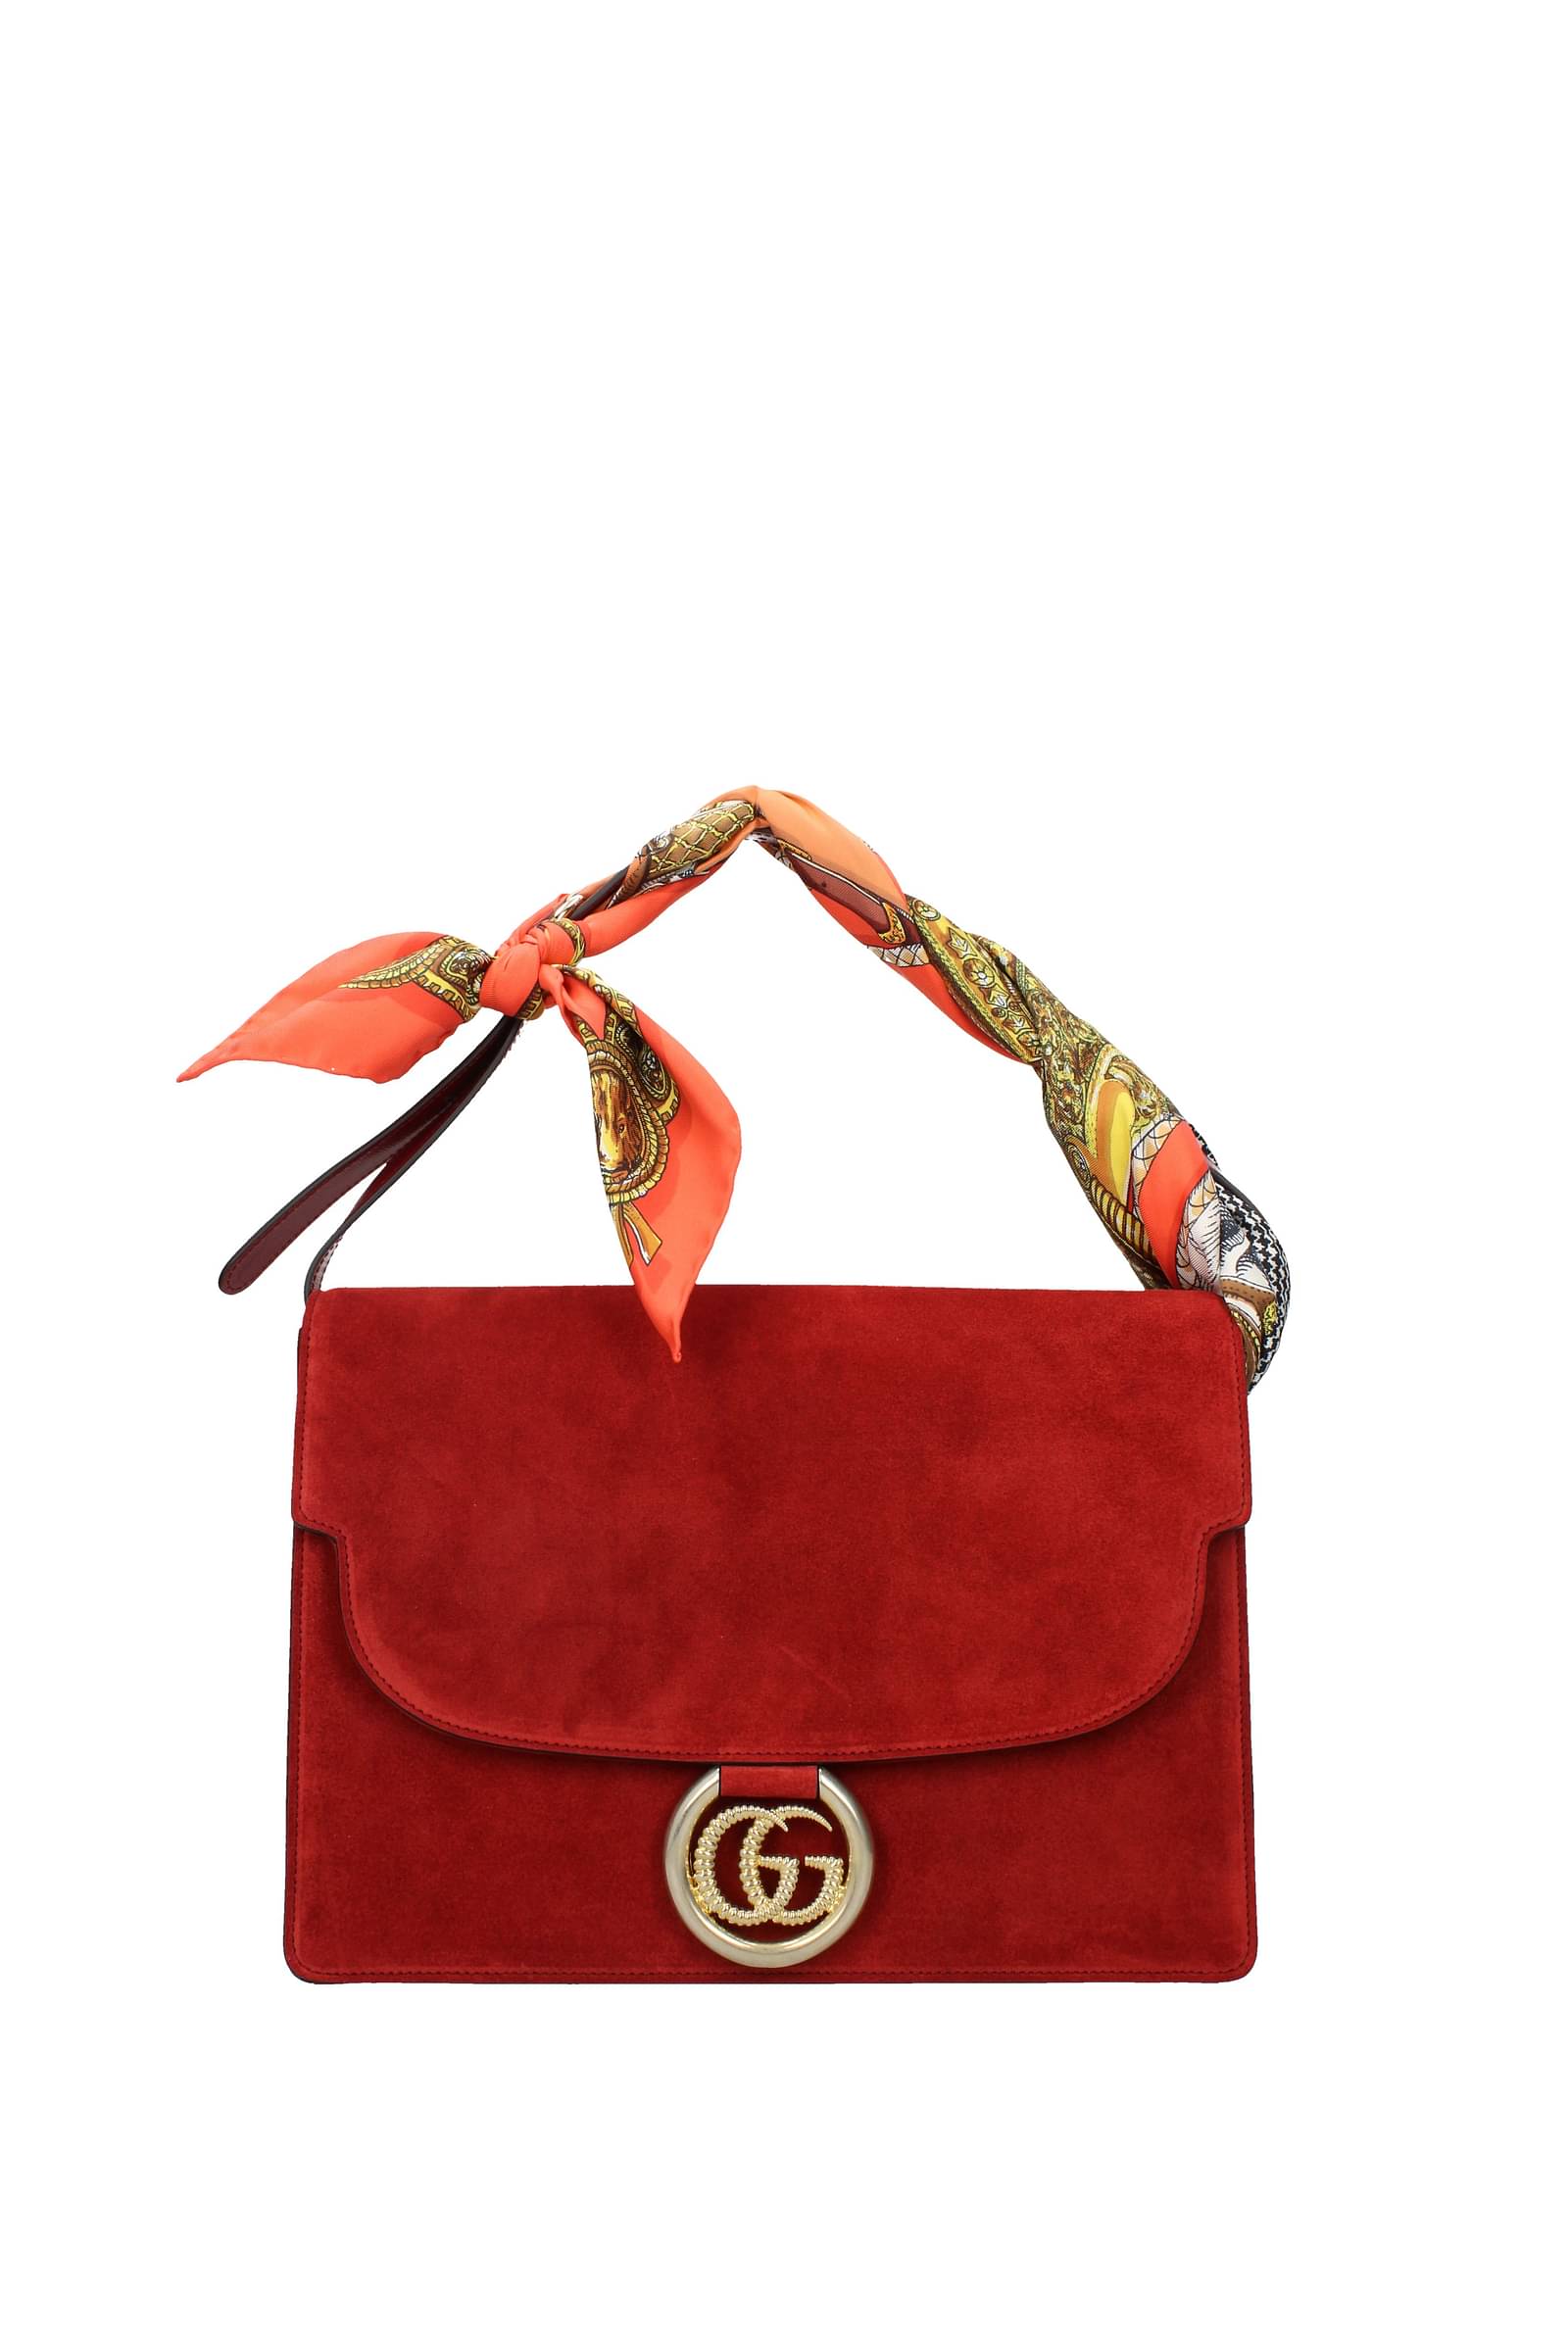 gucci totes outlet